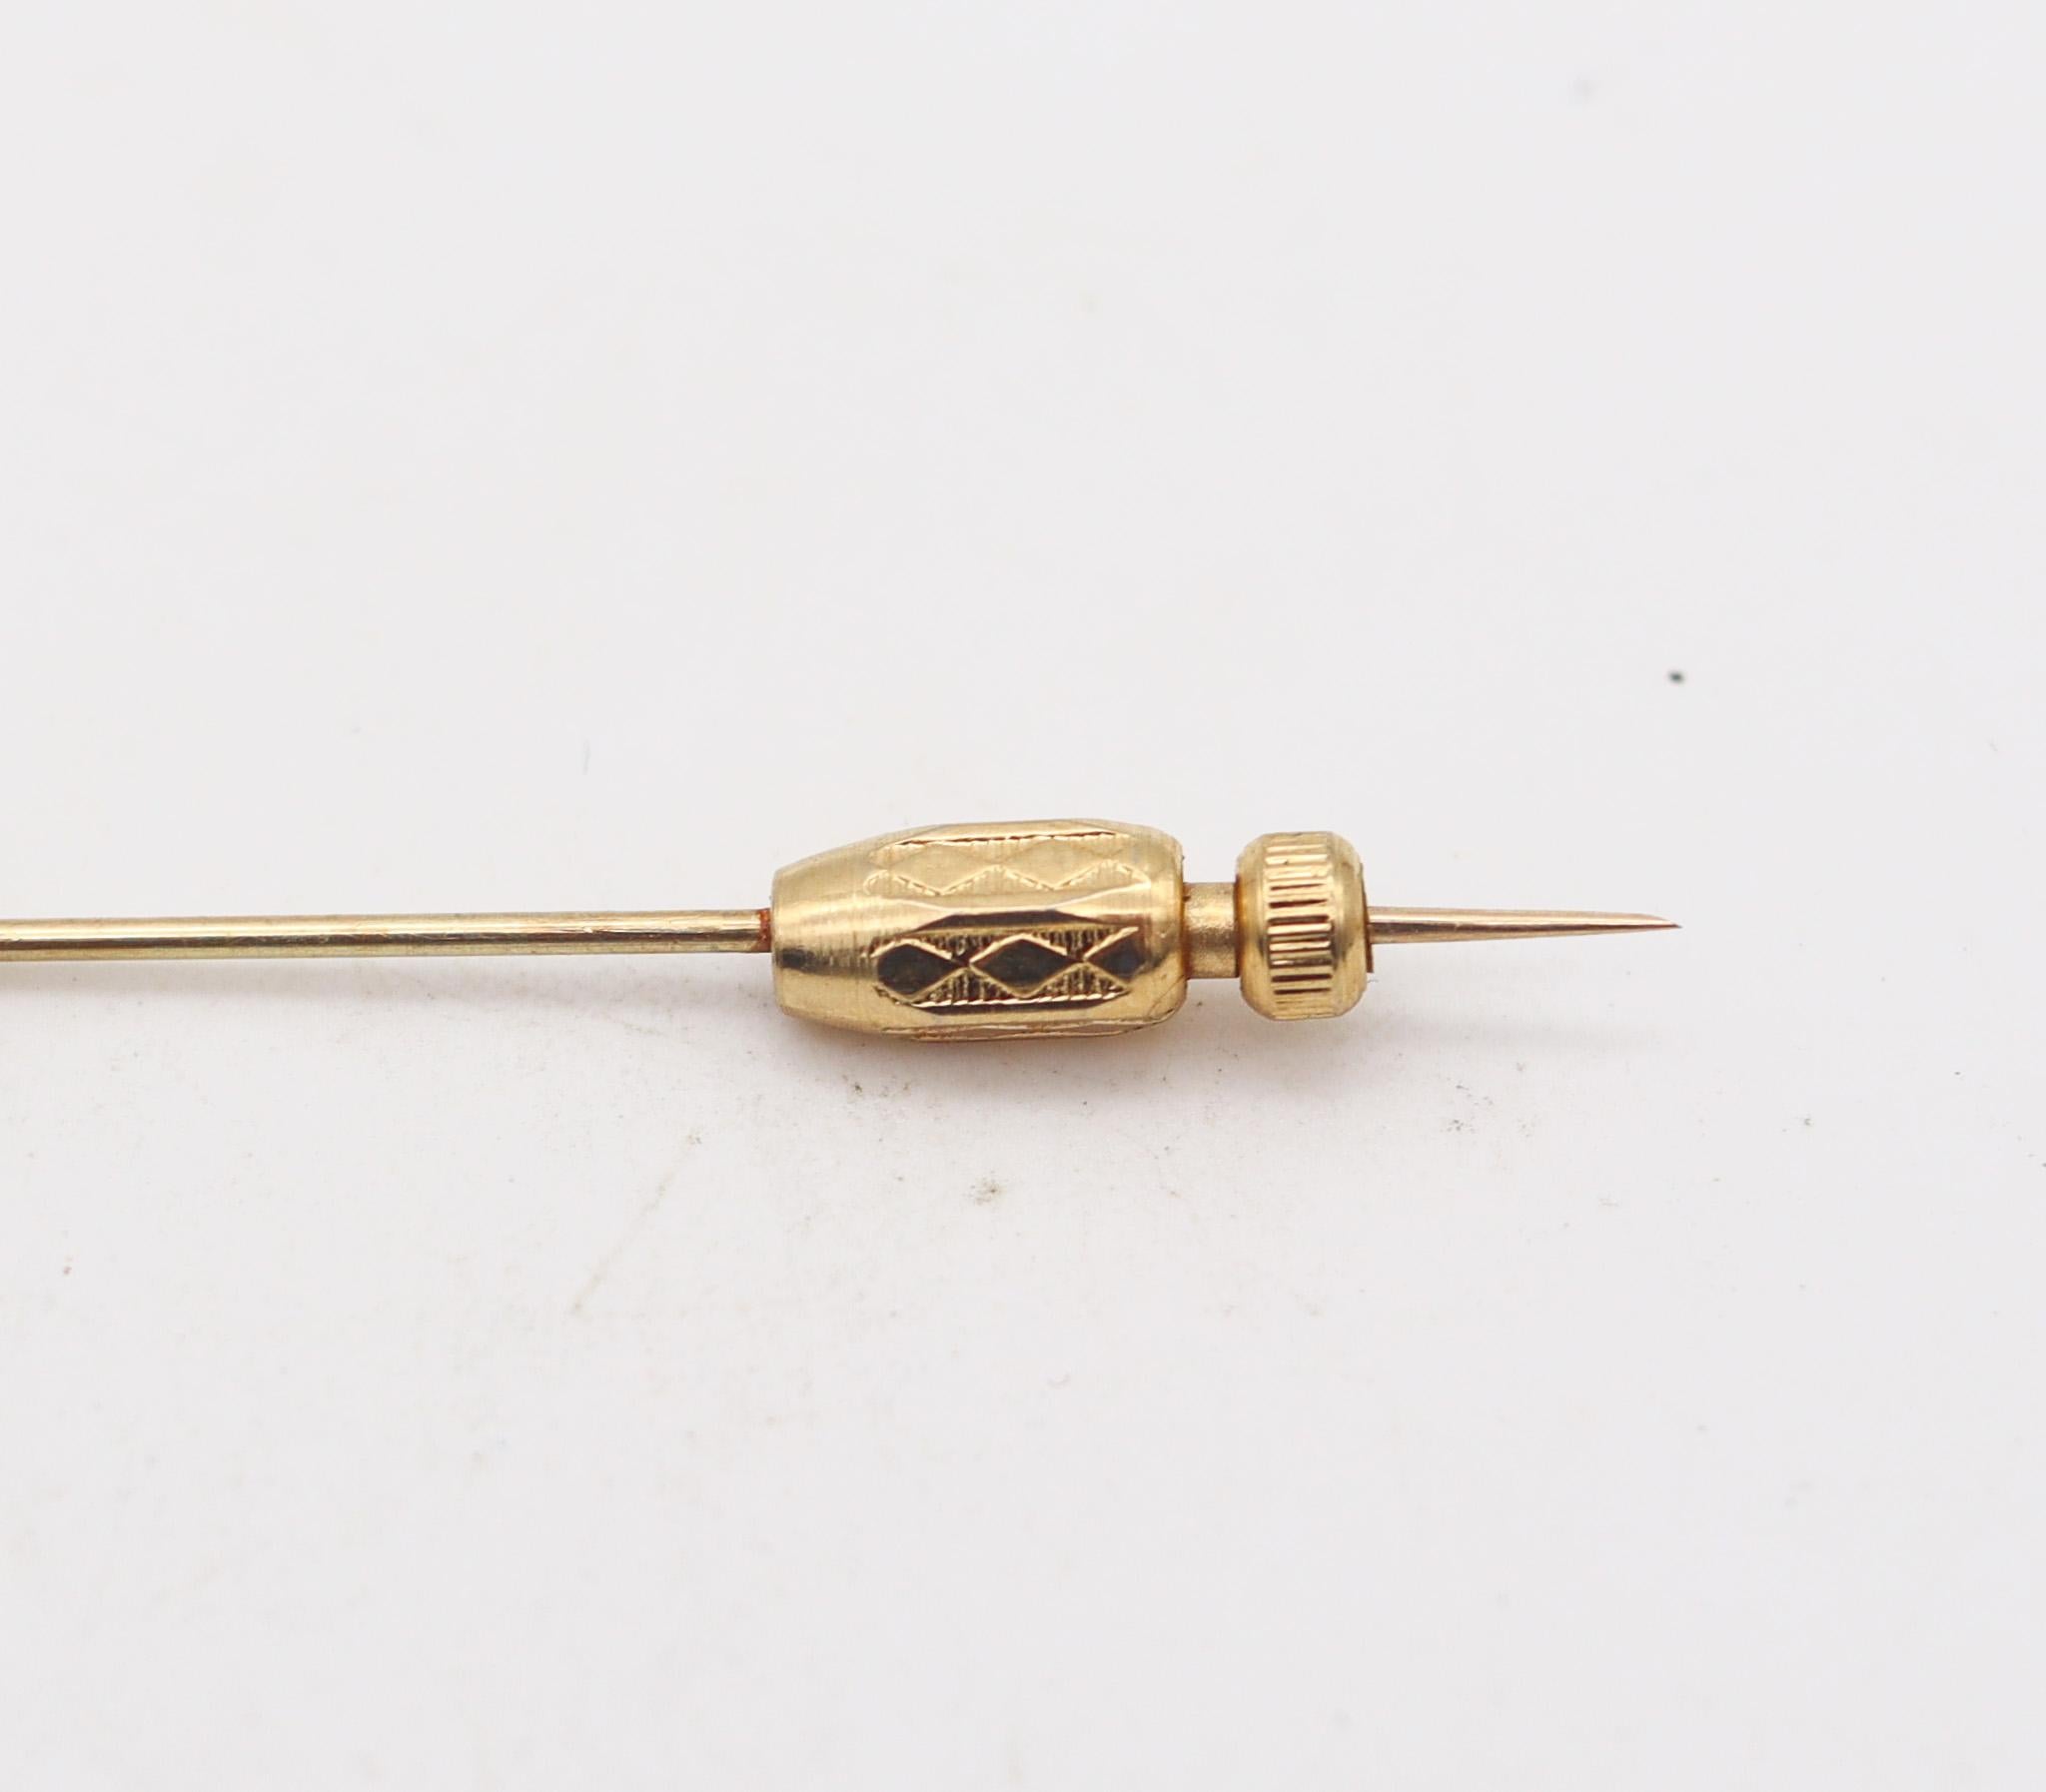 Cabochon Art Deco 1930 Essex Glass Stick Pin Of A Clarinet Musician In 14Kt Yellow Gold